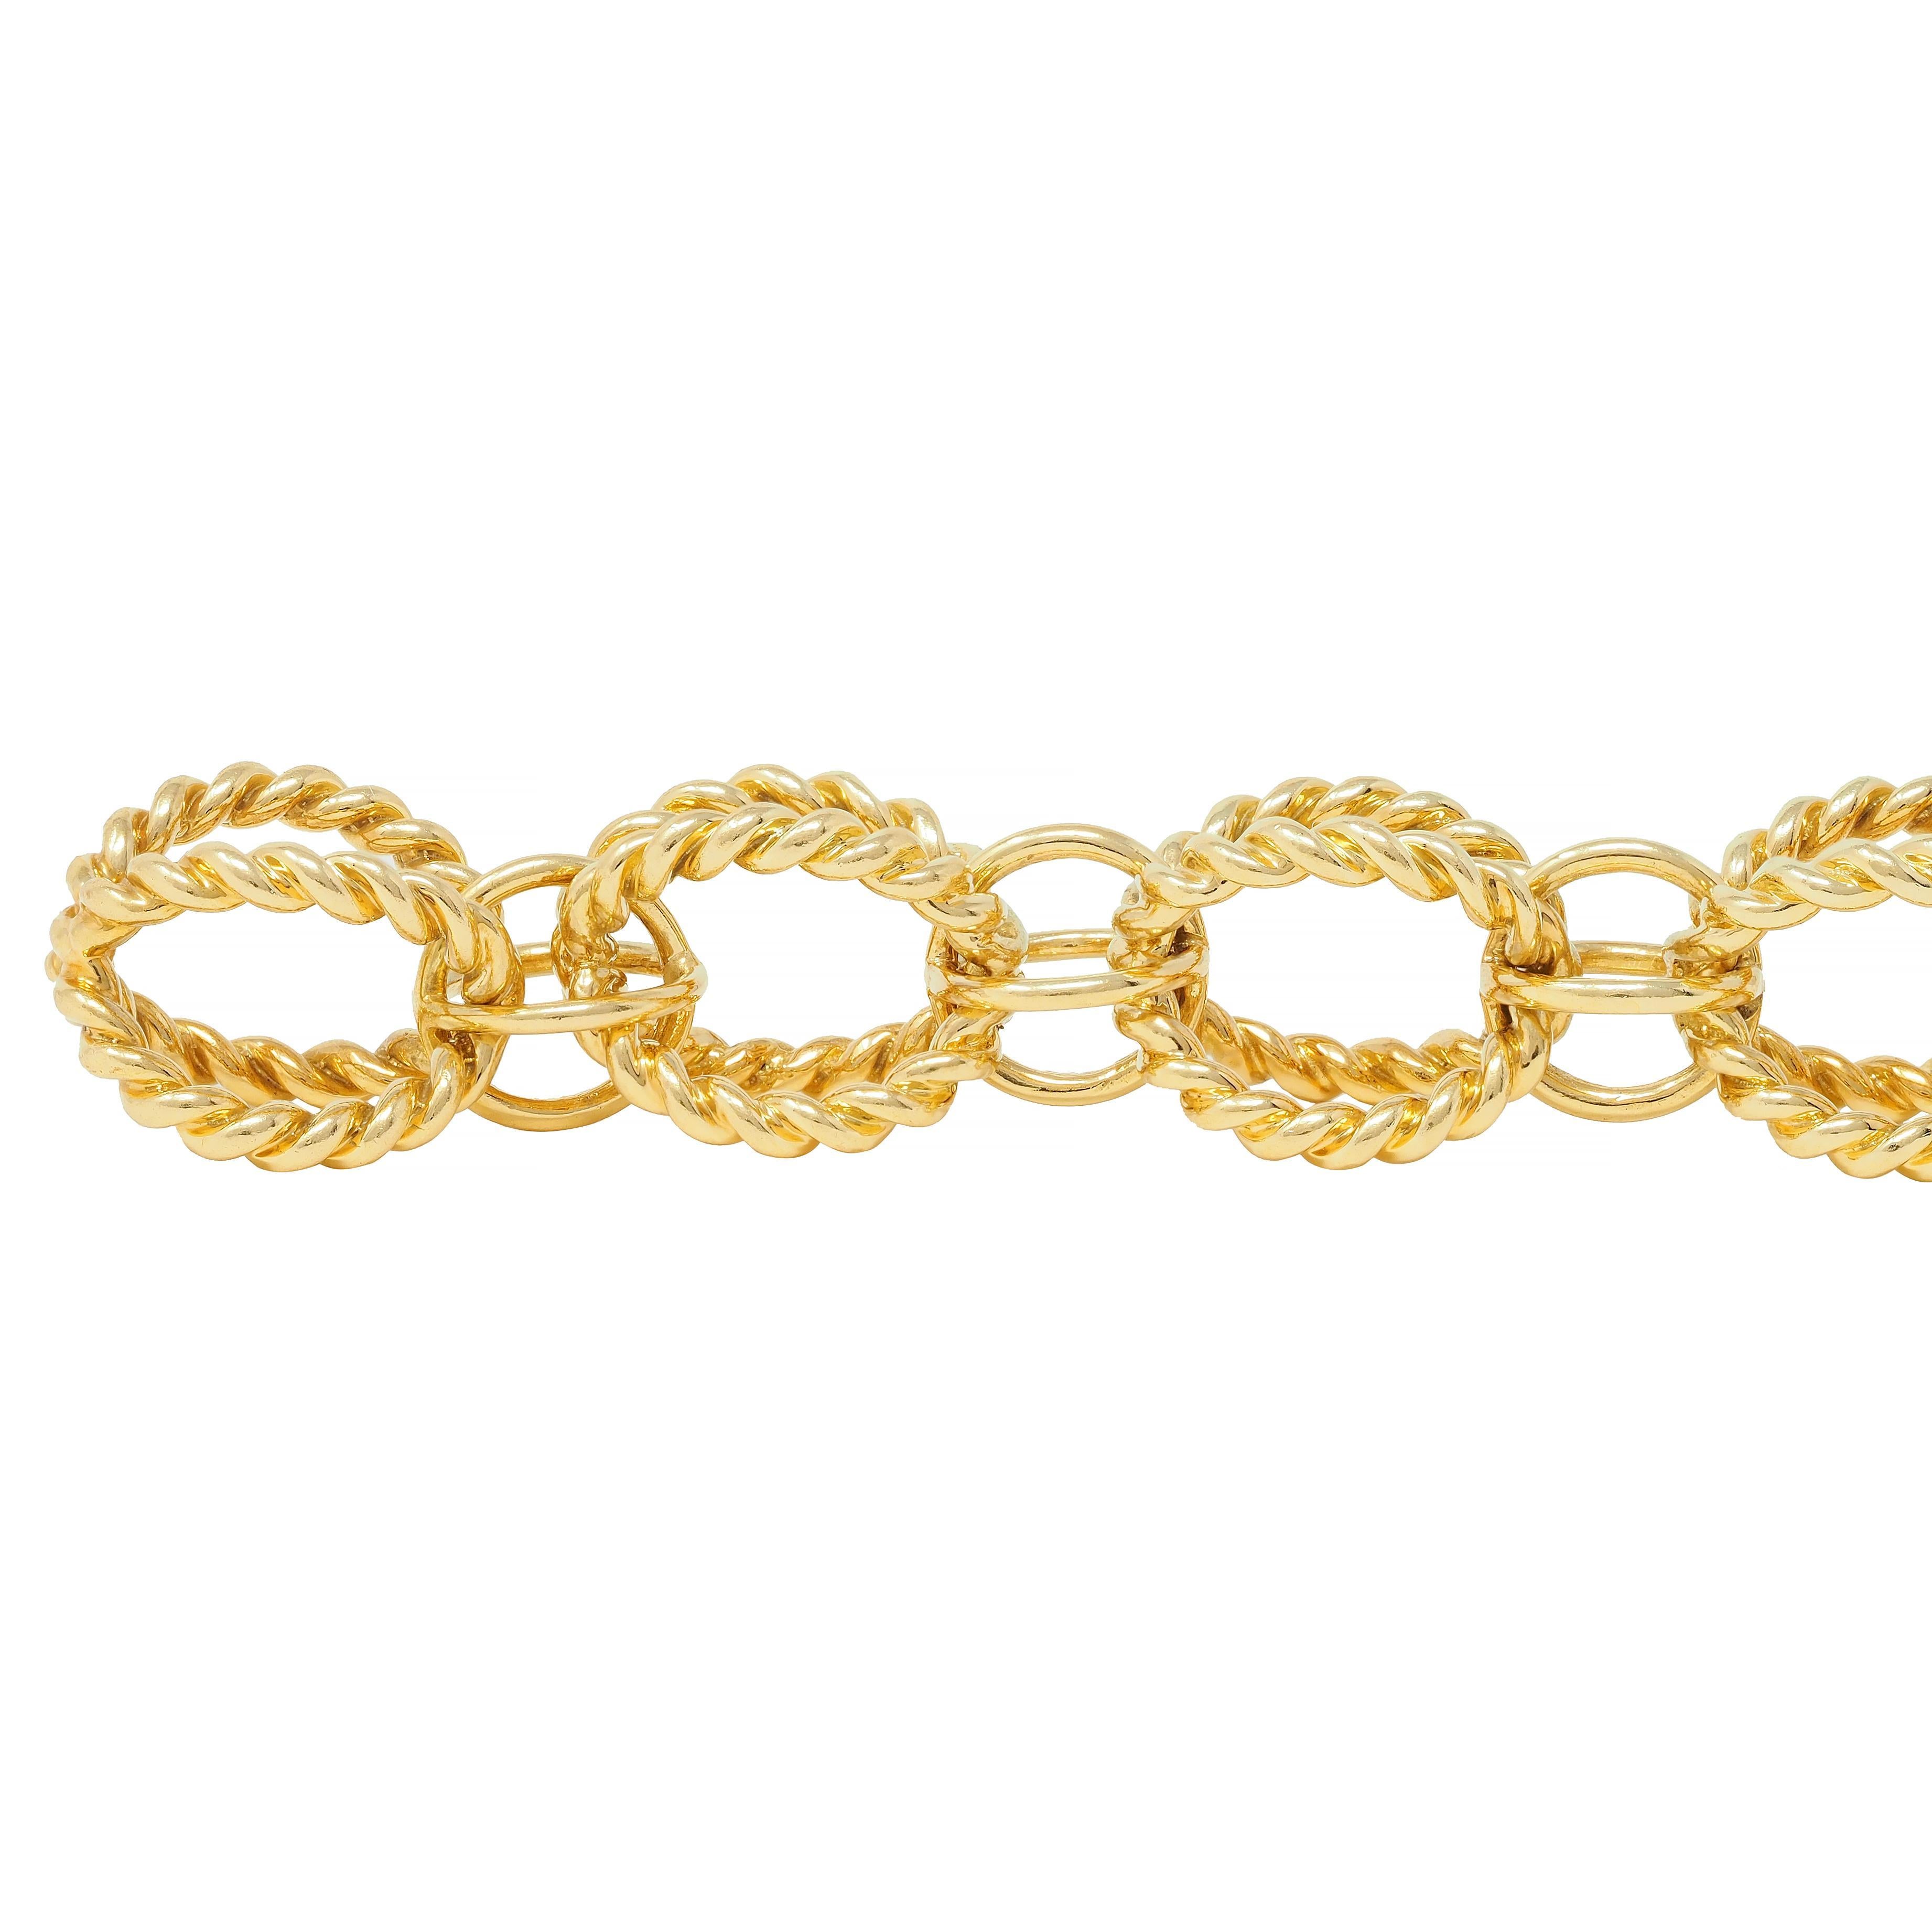 Schlumberger Tiffany & Co. 18 Karat Yellow Gold Circle Rope Bracelet In Excellent Condition For Sale In Philadelphia, PA